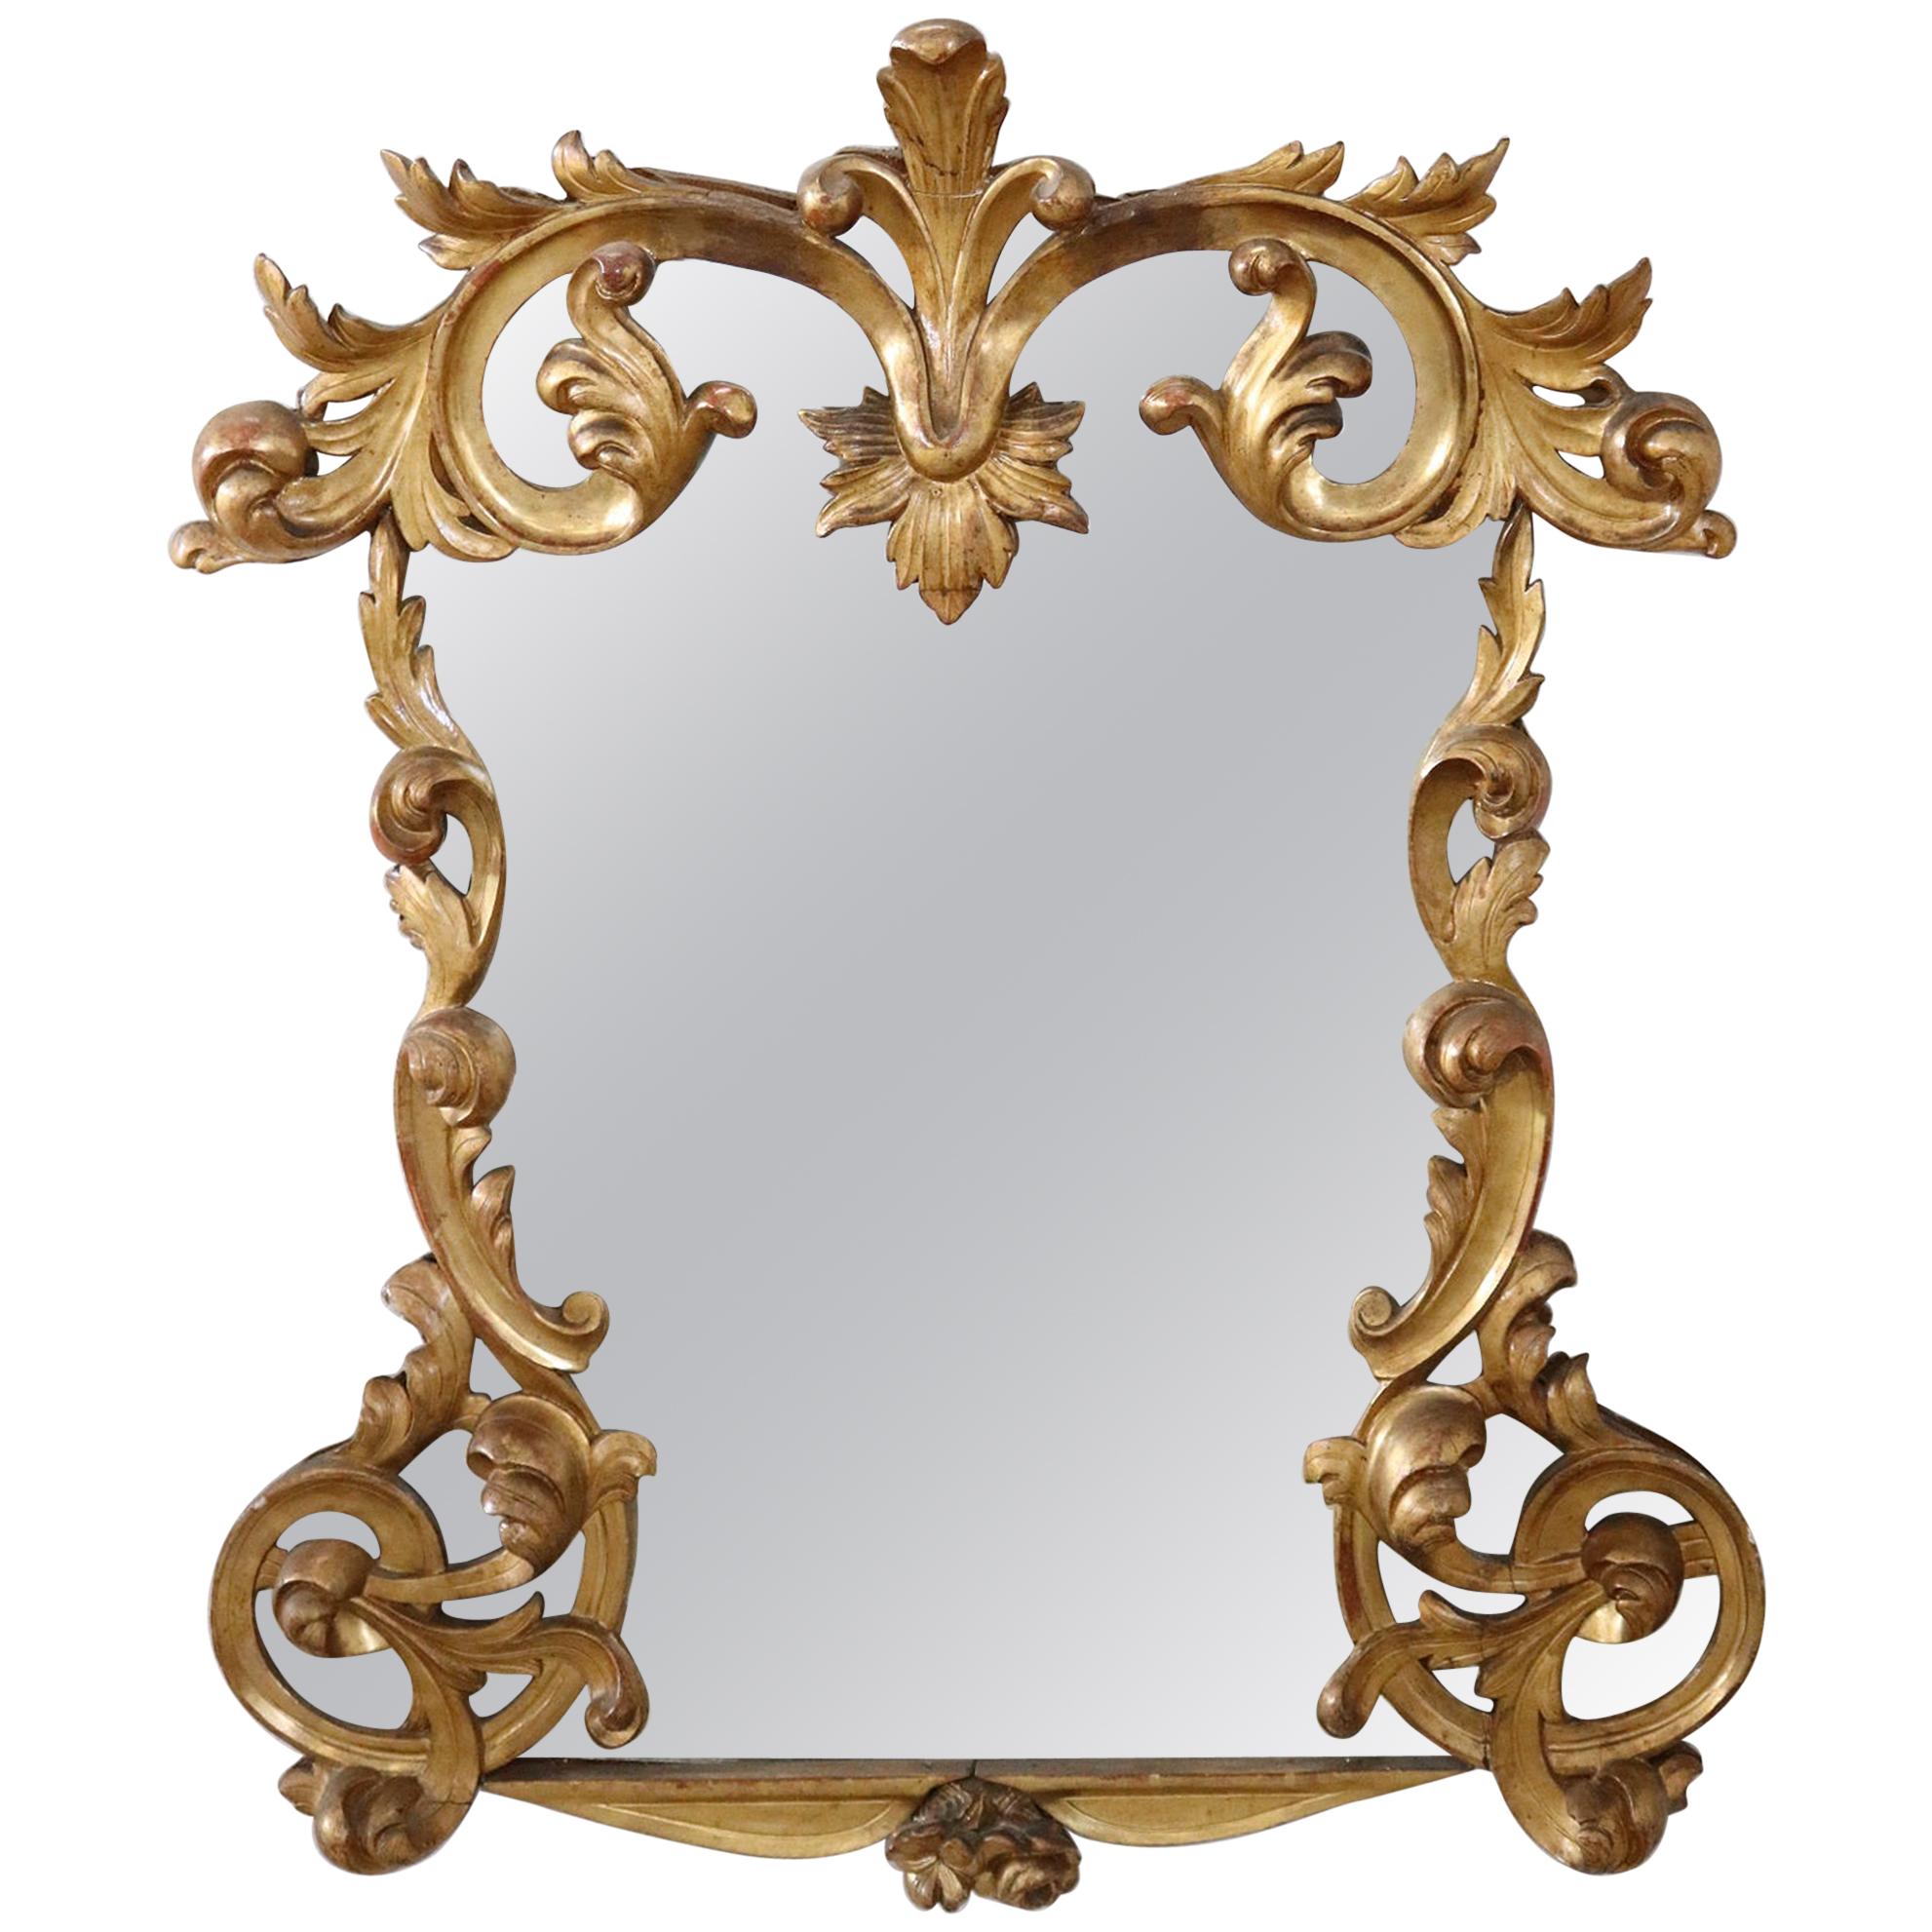 Late 19th Century Italian Baroque Style Carved Gilded Wood Wall Mirror